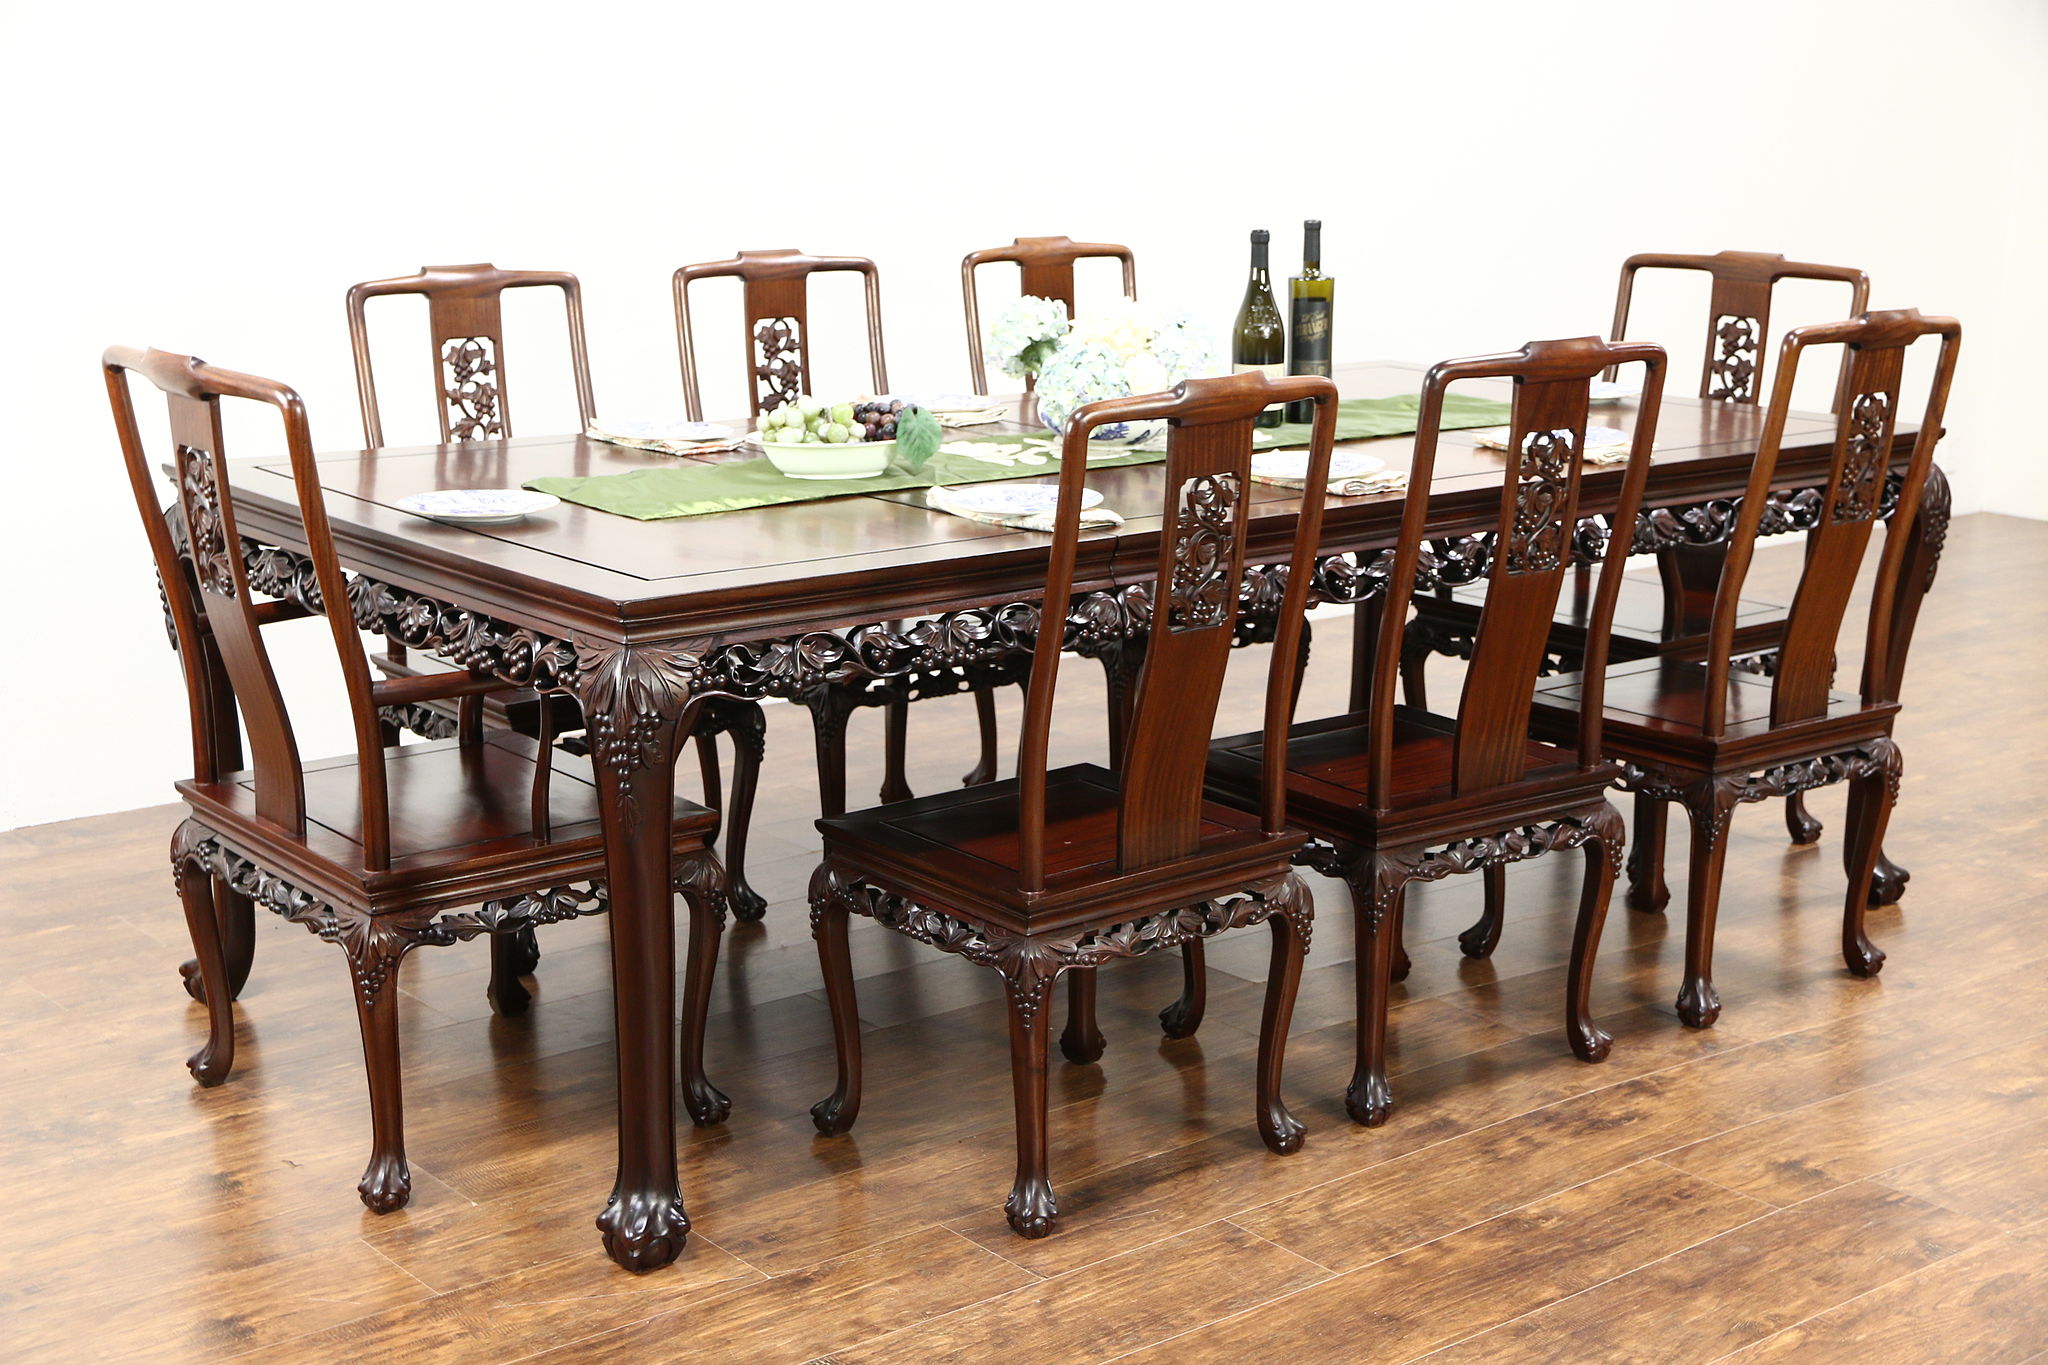 Sold Chinese Rosewood Vintage Dining Set Table 8 Chairs Hand Carved Grapevine Harp Gallery Antiques Furniture